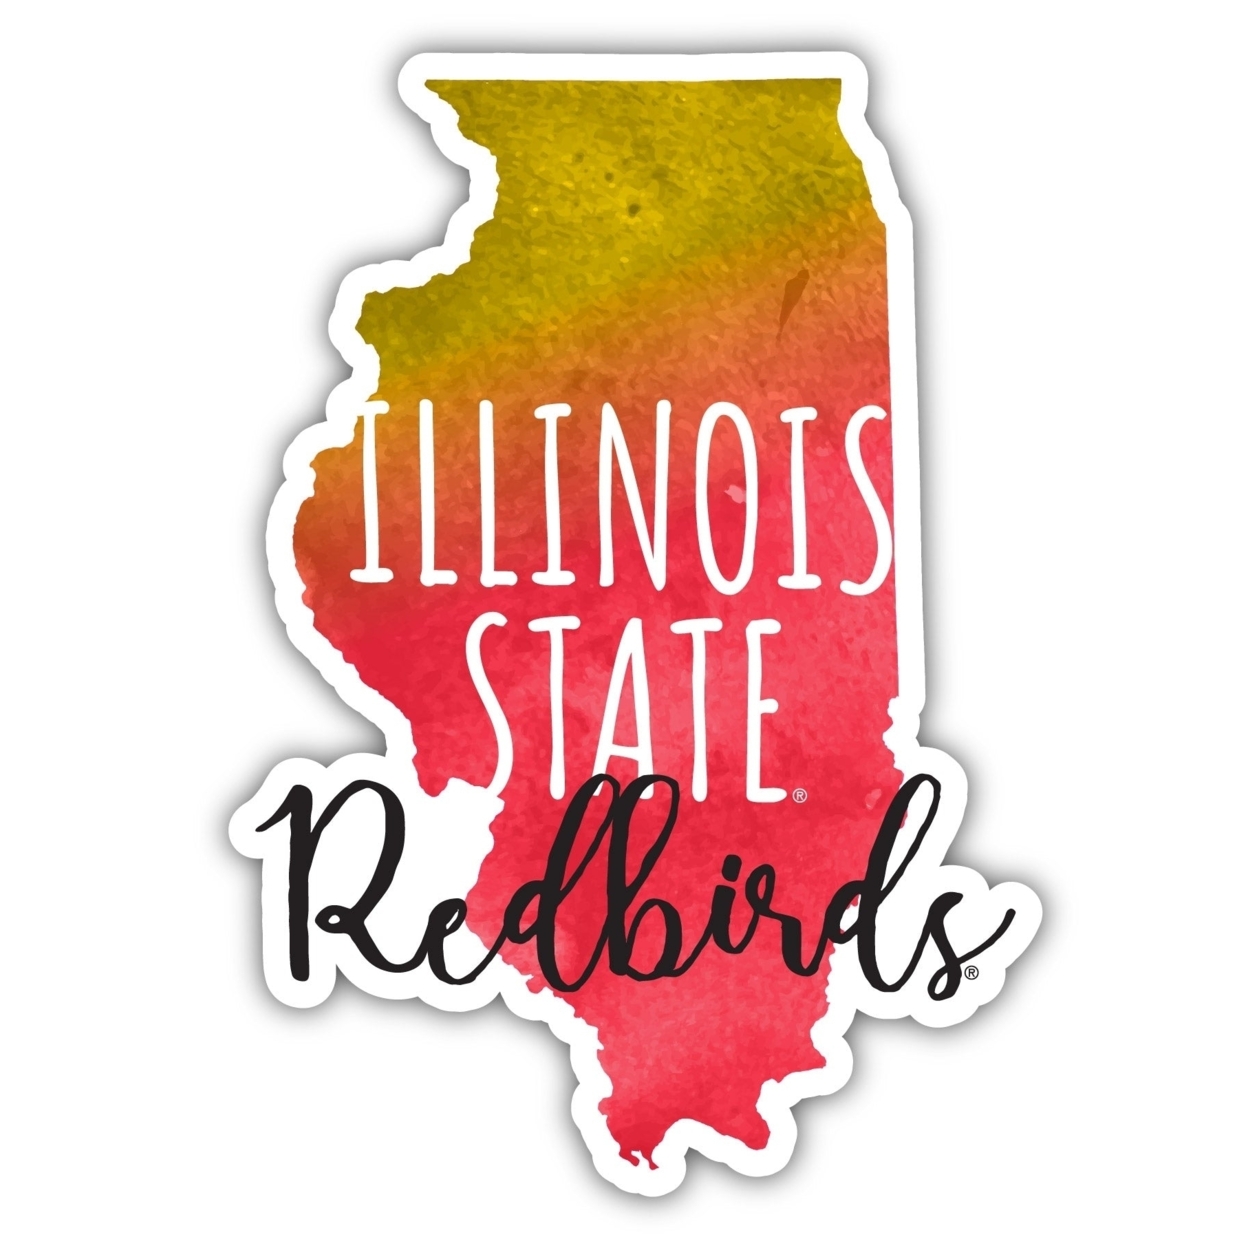 Illinois State Redbirds Watercolor State Die Cut Decal 4-Inch